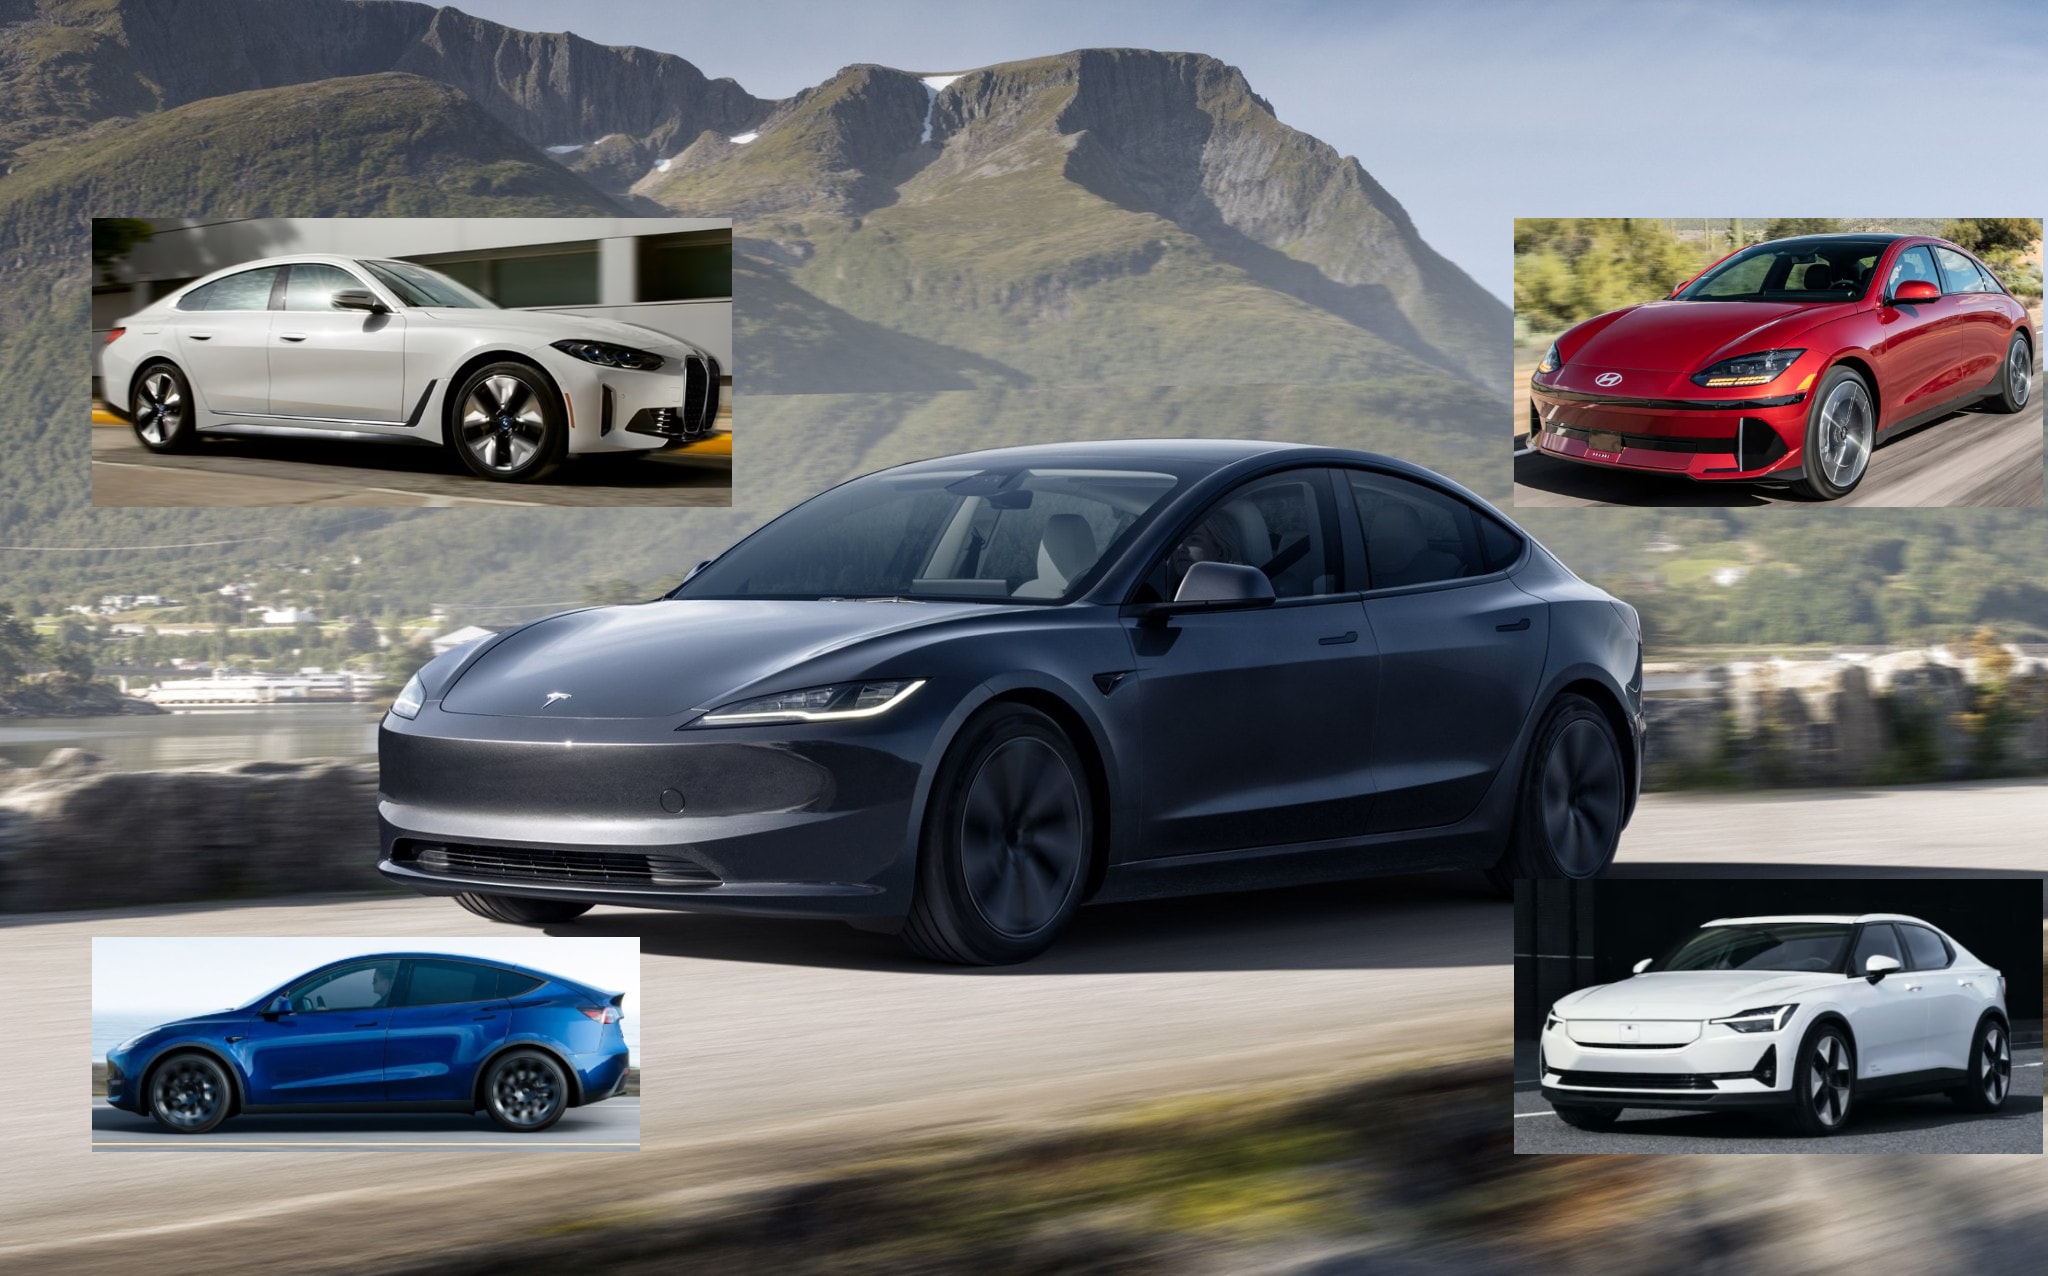 Tesla Model 3 Highland for US Has Arrived, Does It Soar above Its Rivals or  Not? - autoevolution